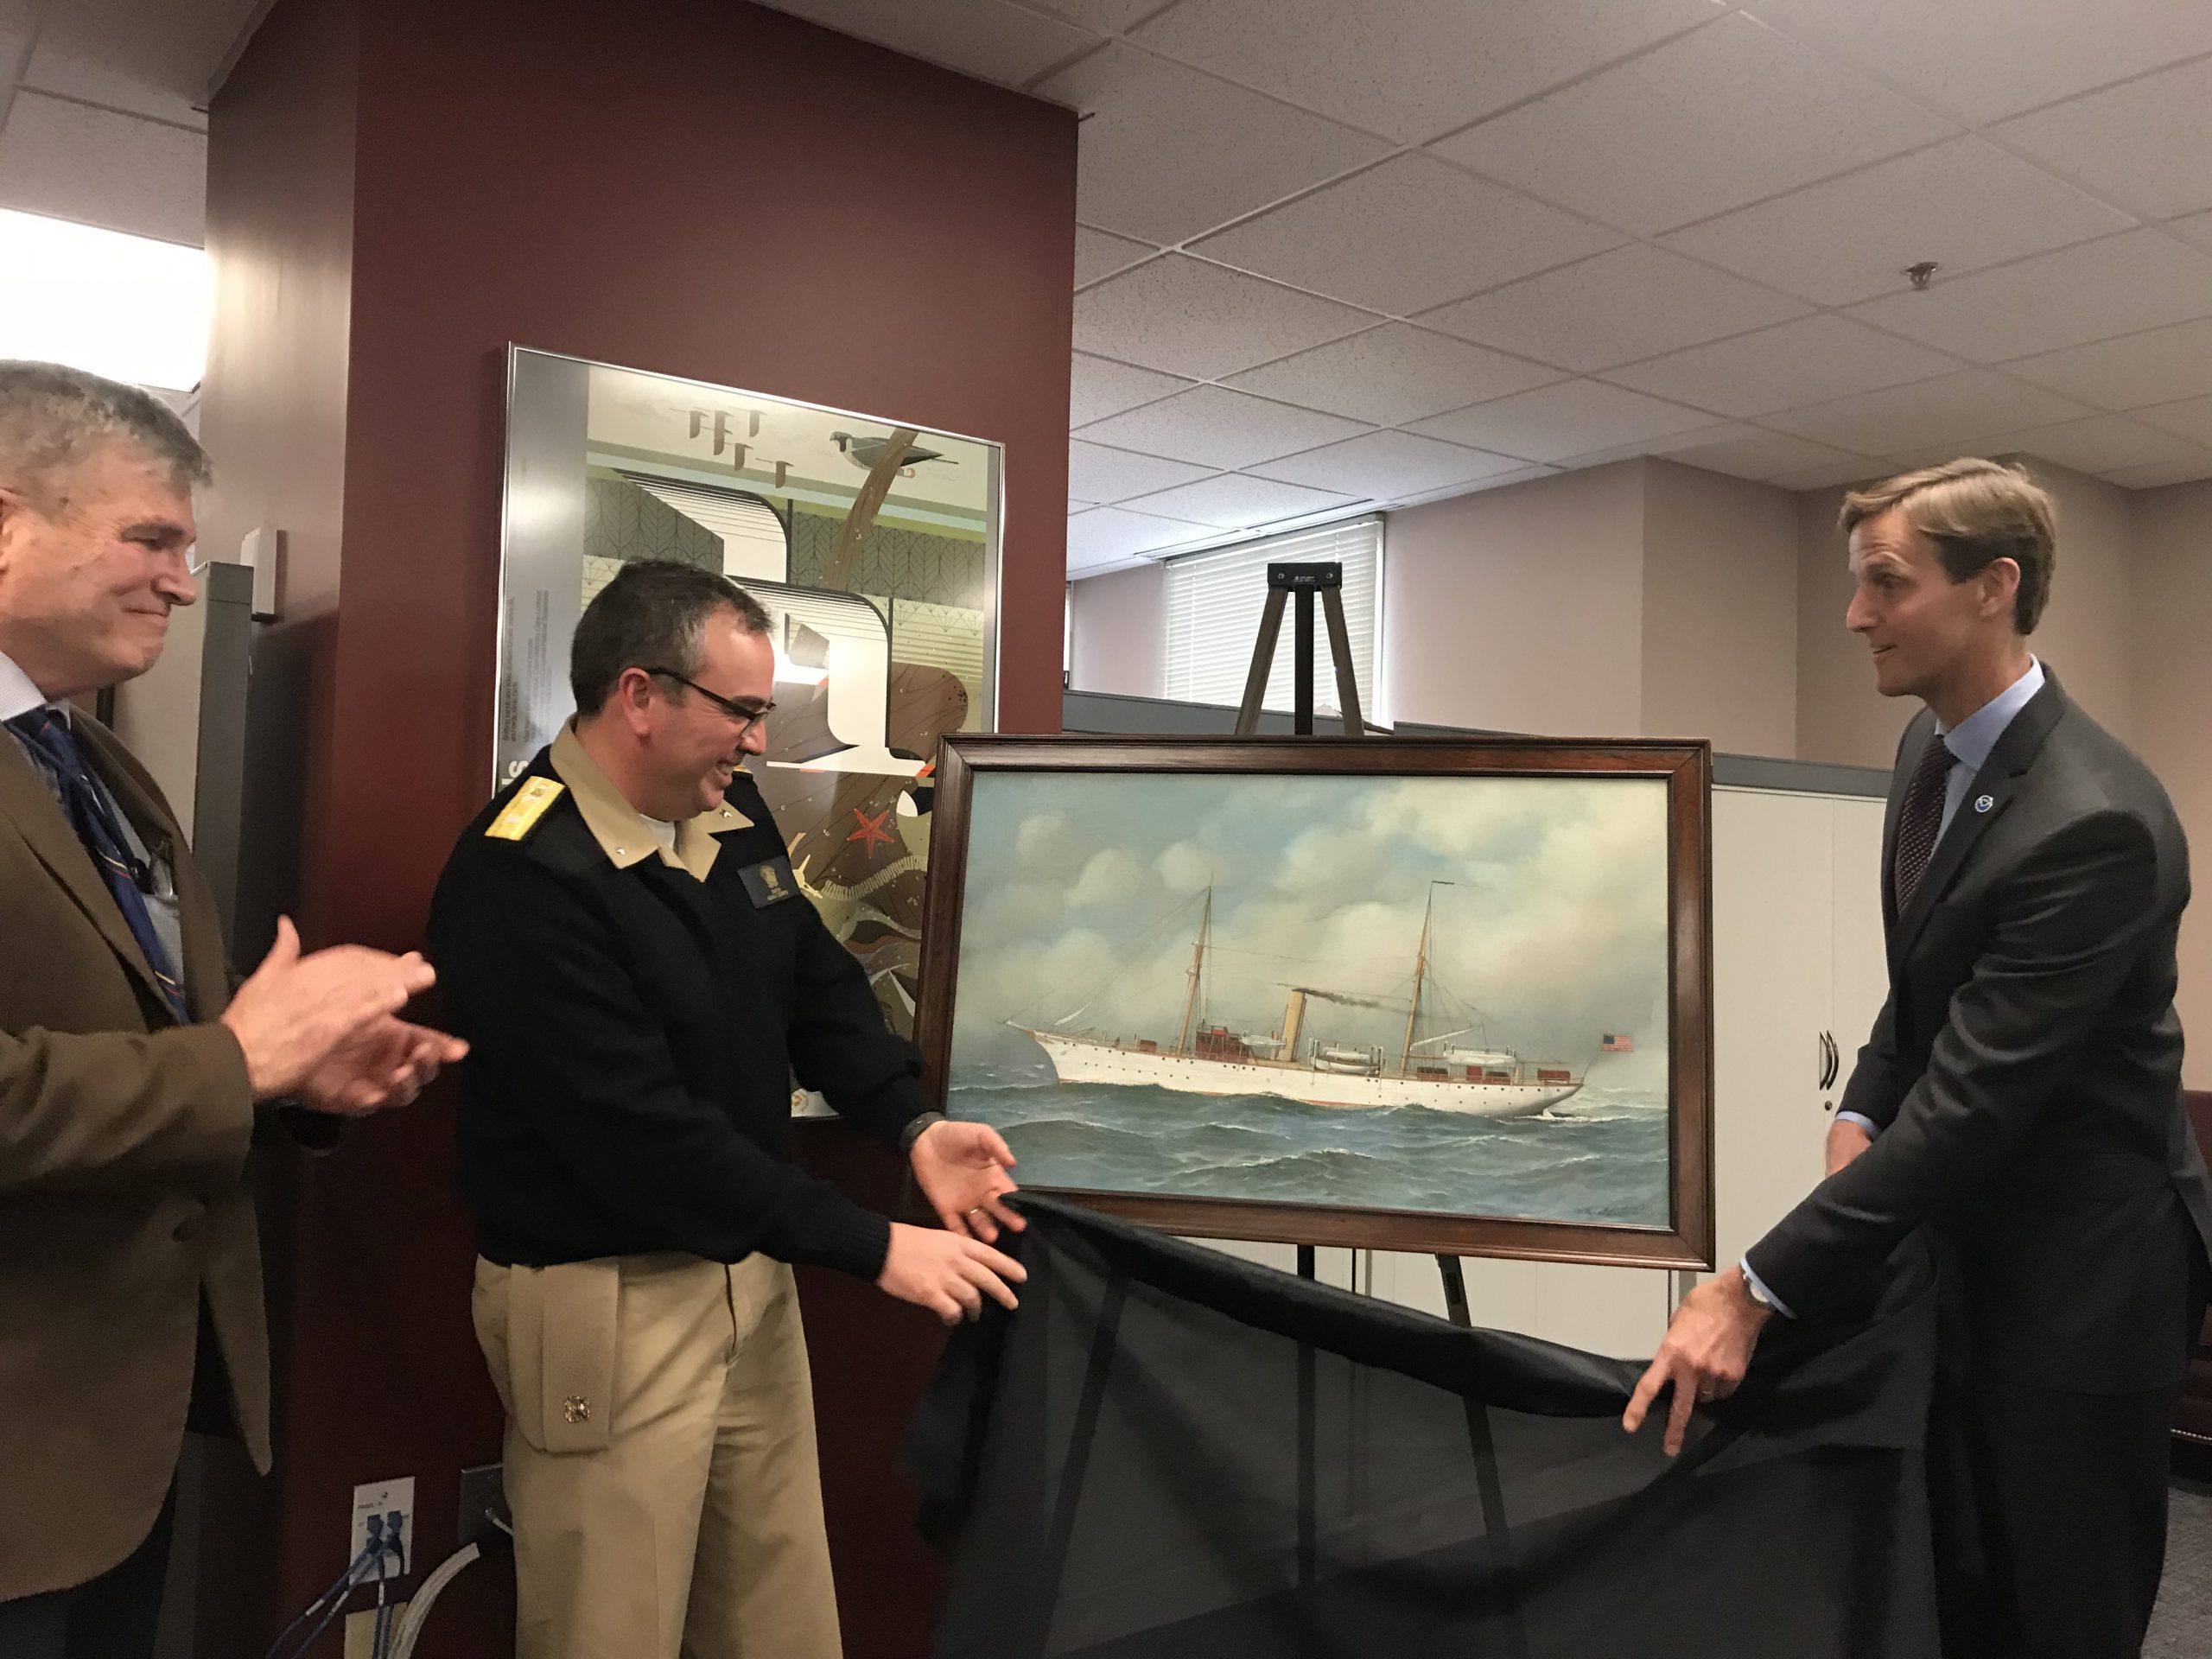 Capt. Skip Theberge, NOAA ret., Rear Adm. Shepard Smith, NOAA, and ear Adm. Tim Gallaudet, USN ret., unveil the Pathfinder painting.